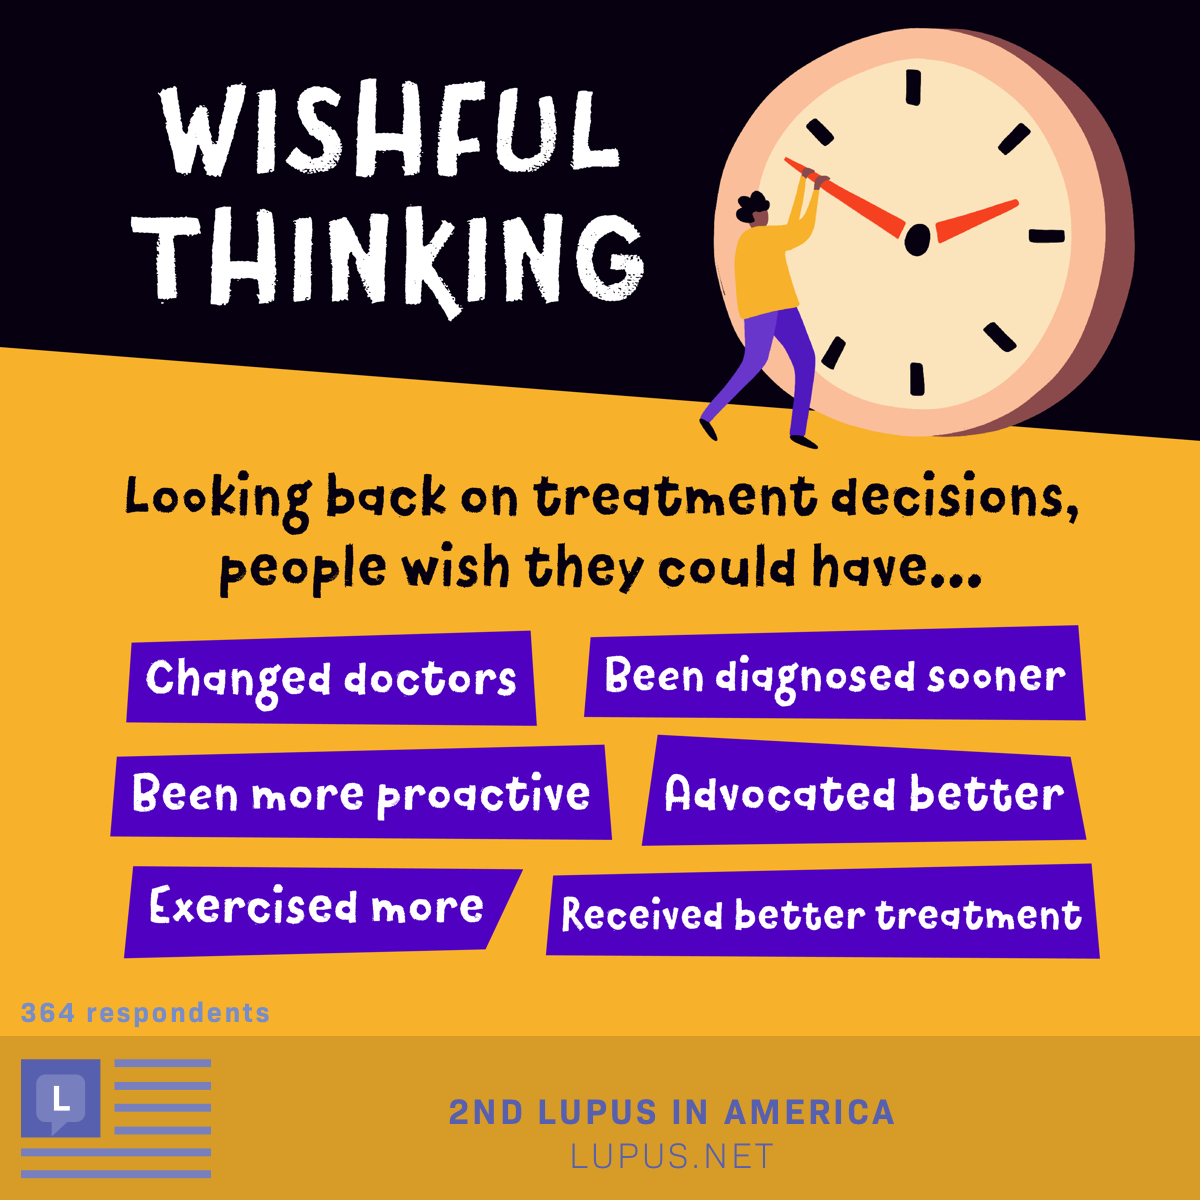 A person turns back the clock. People with lupus wish they were diagnosed sooner, received better treatment, or changed doctors.